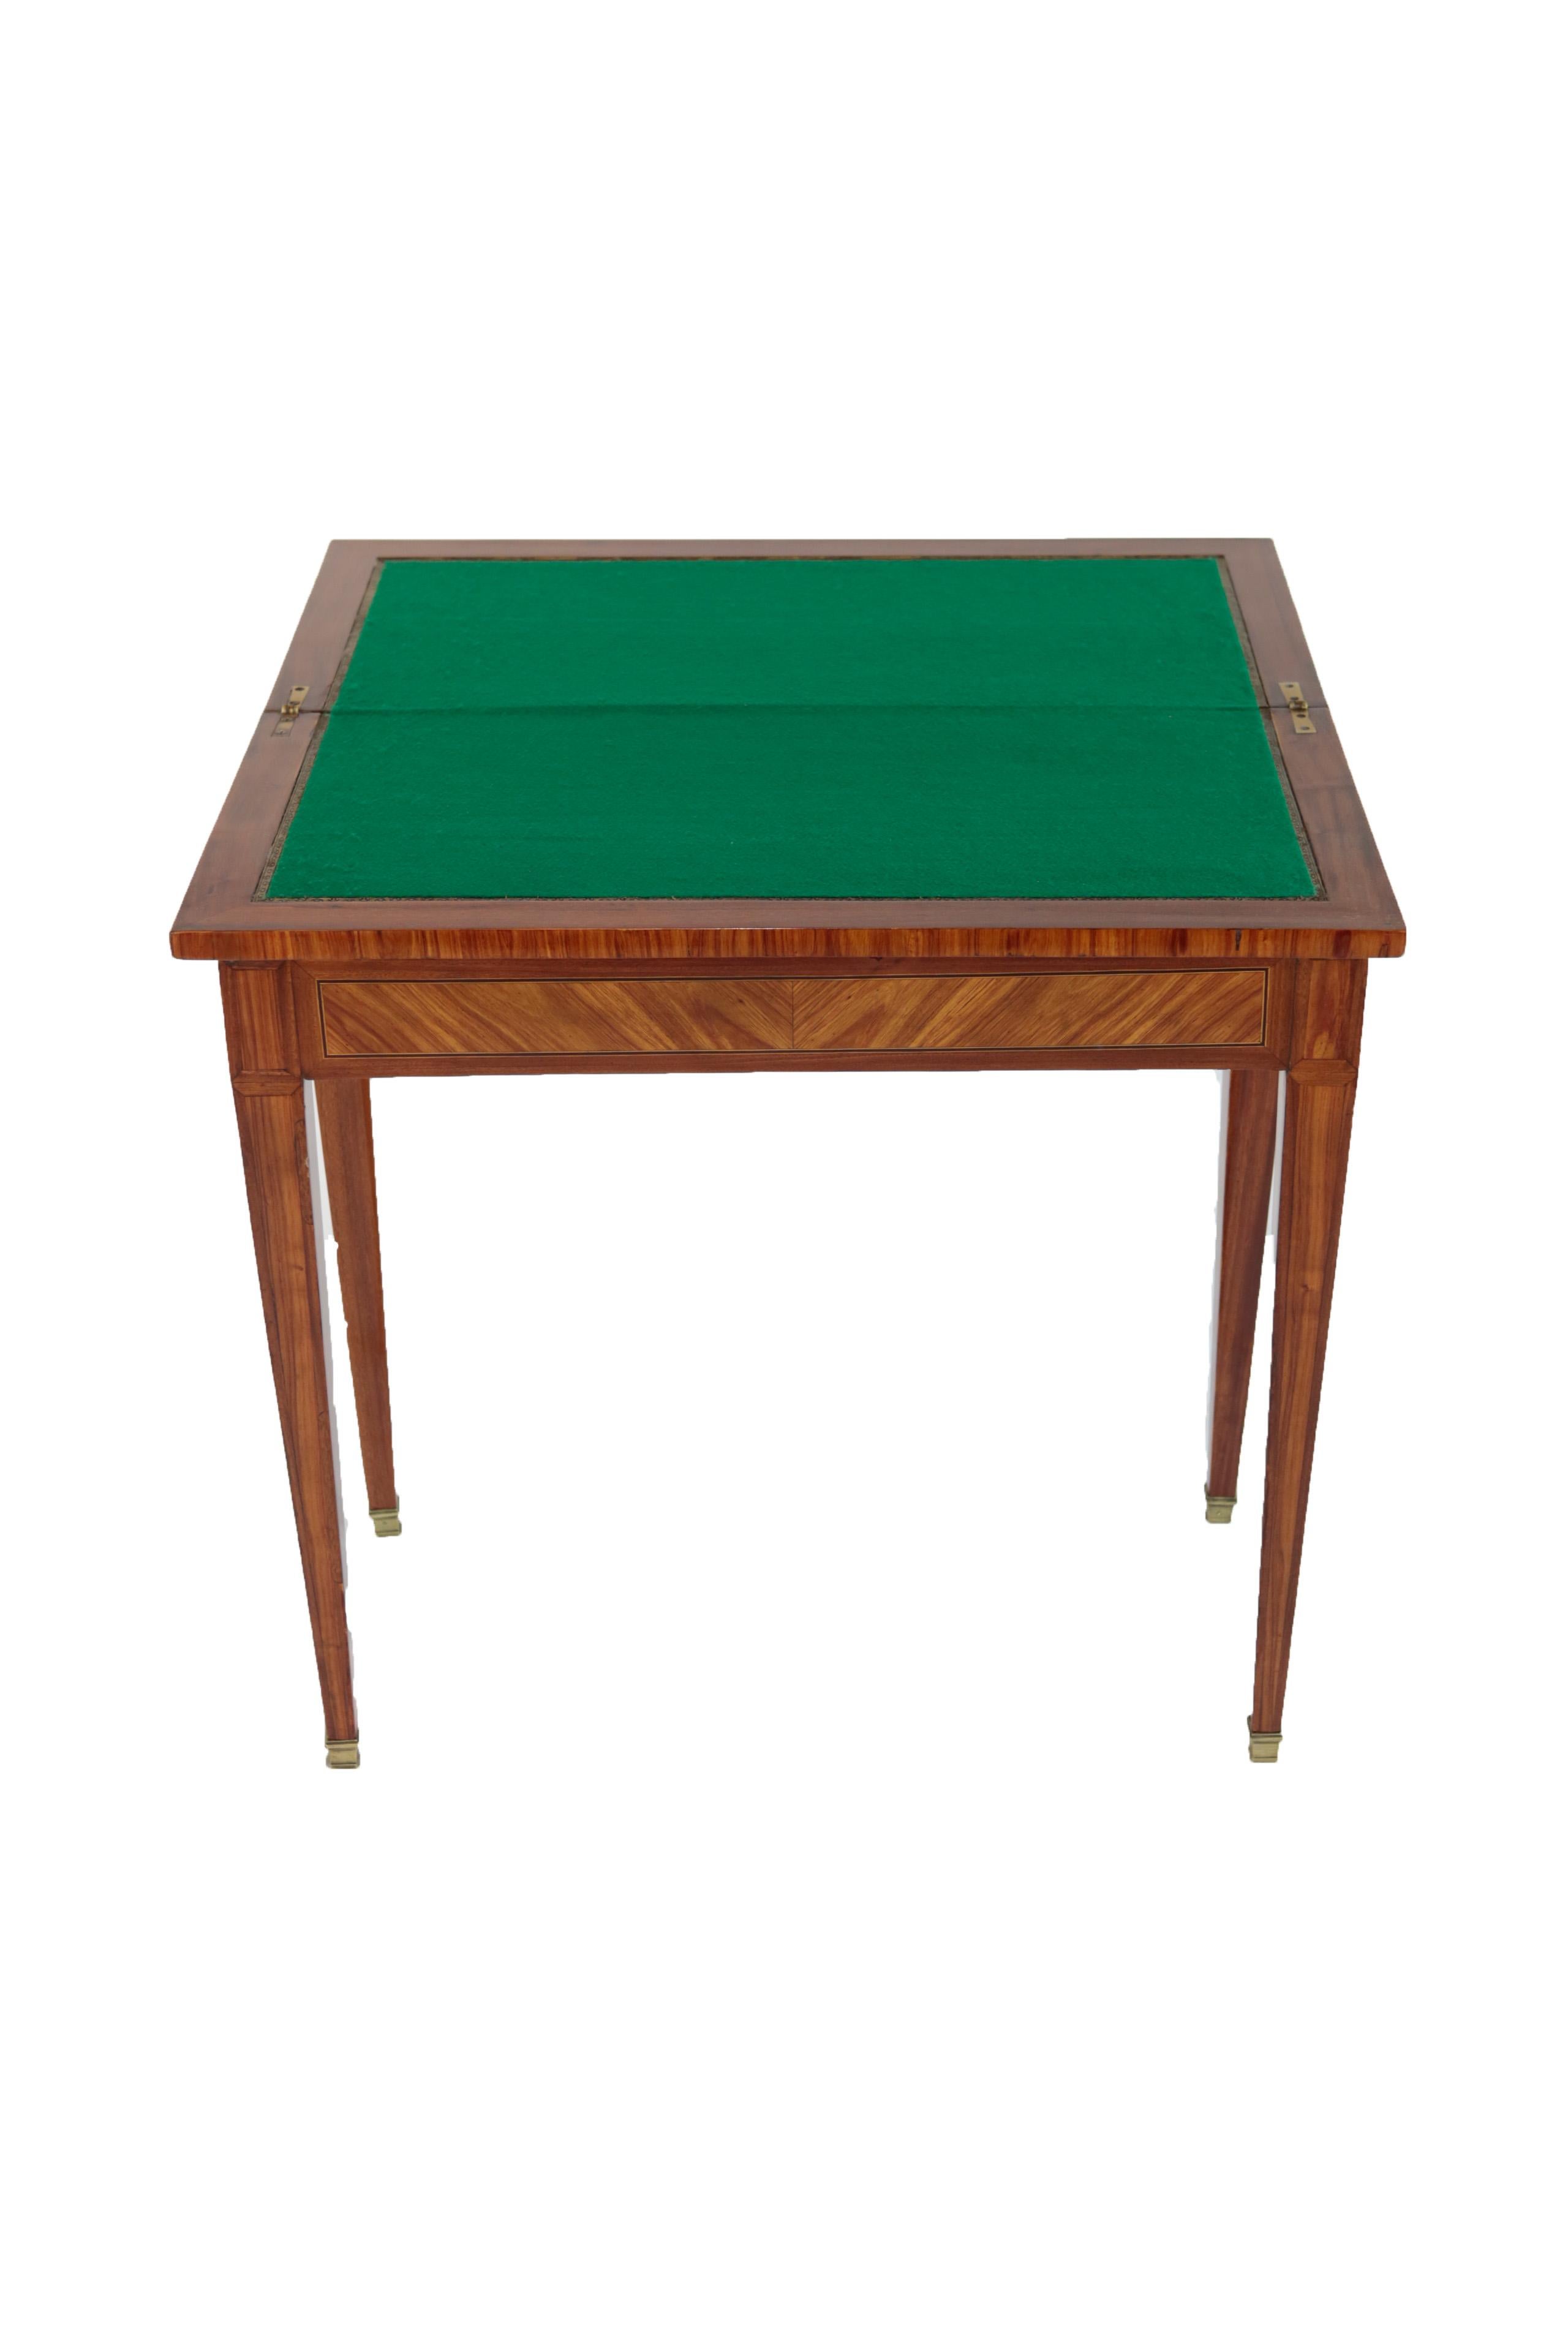 Mid-19th Century Foldable Game Table, France, Rosewood, circa 1850-1860